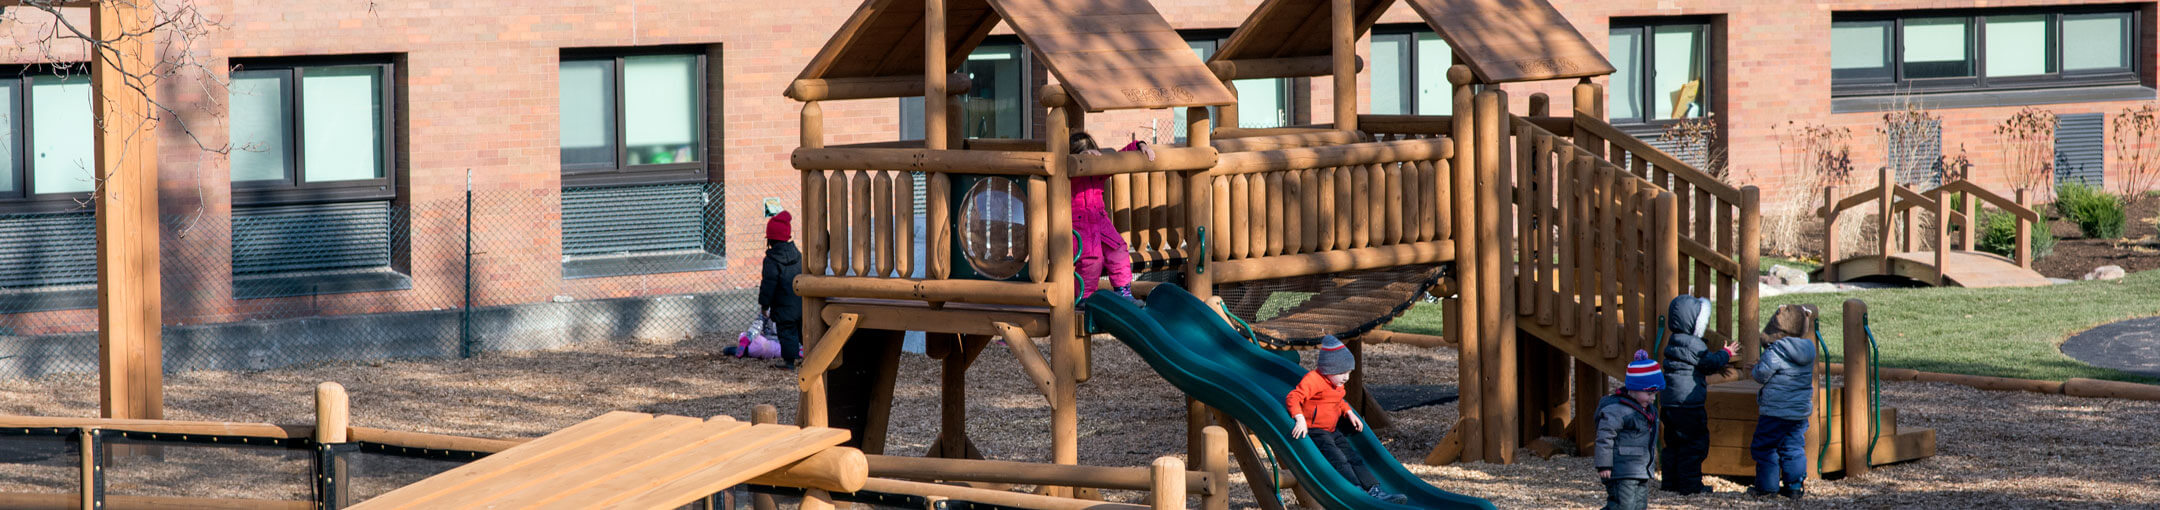 Children playing in the Margaret's House playground.